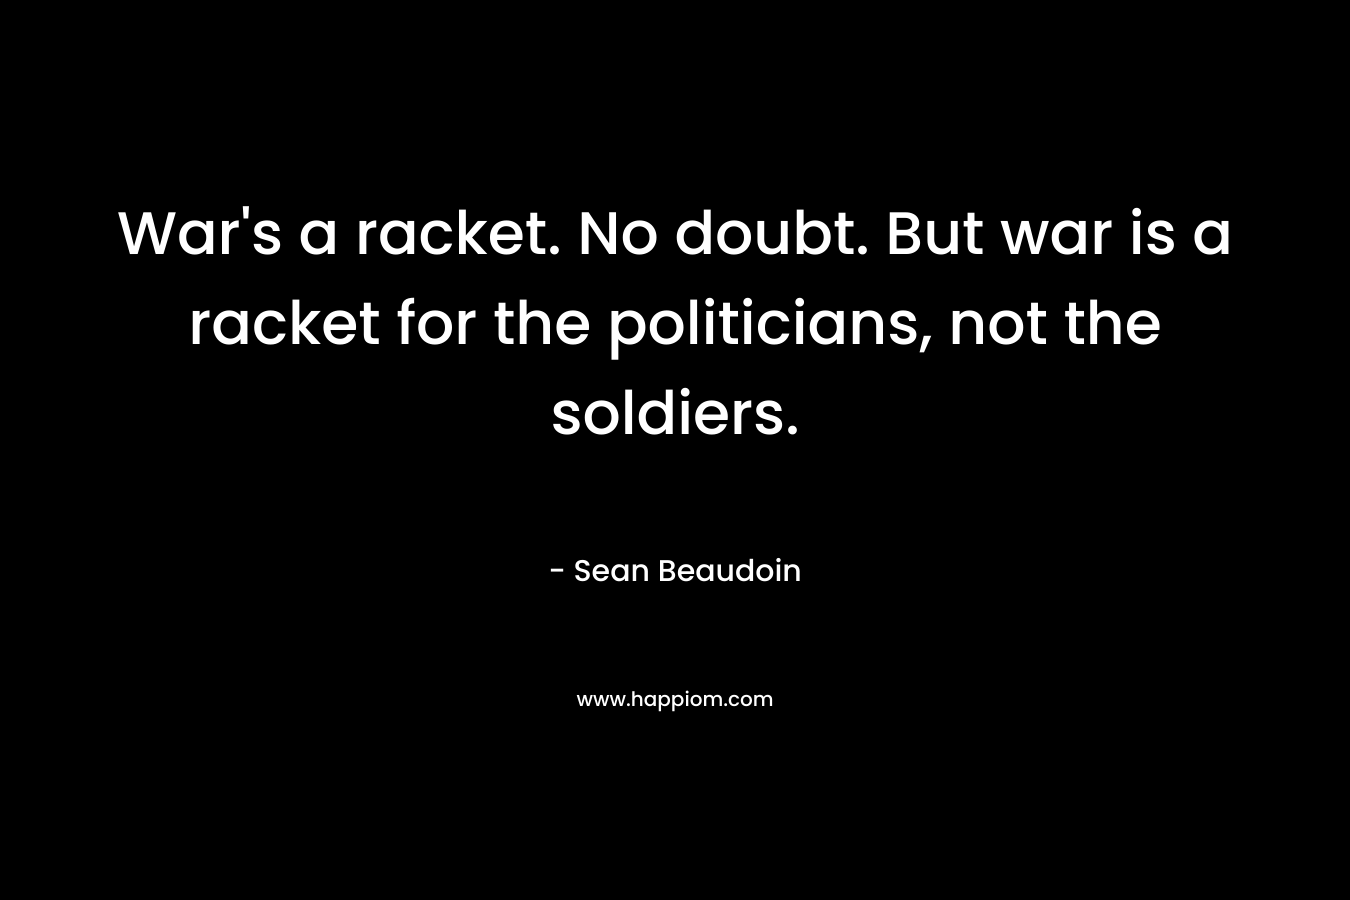 War's a racket. No doubt. But war is a racket for the politicians, not the soldiers.